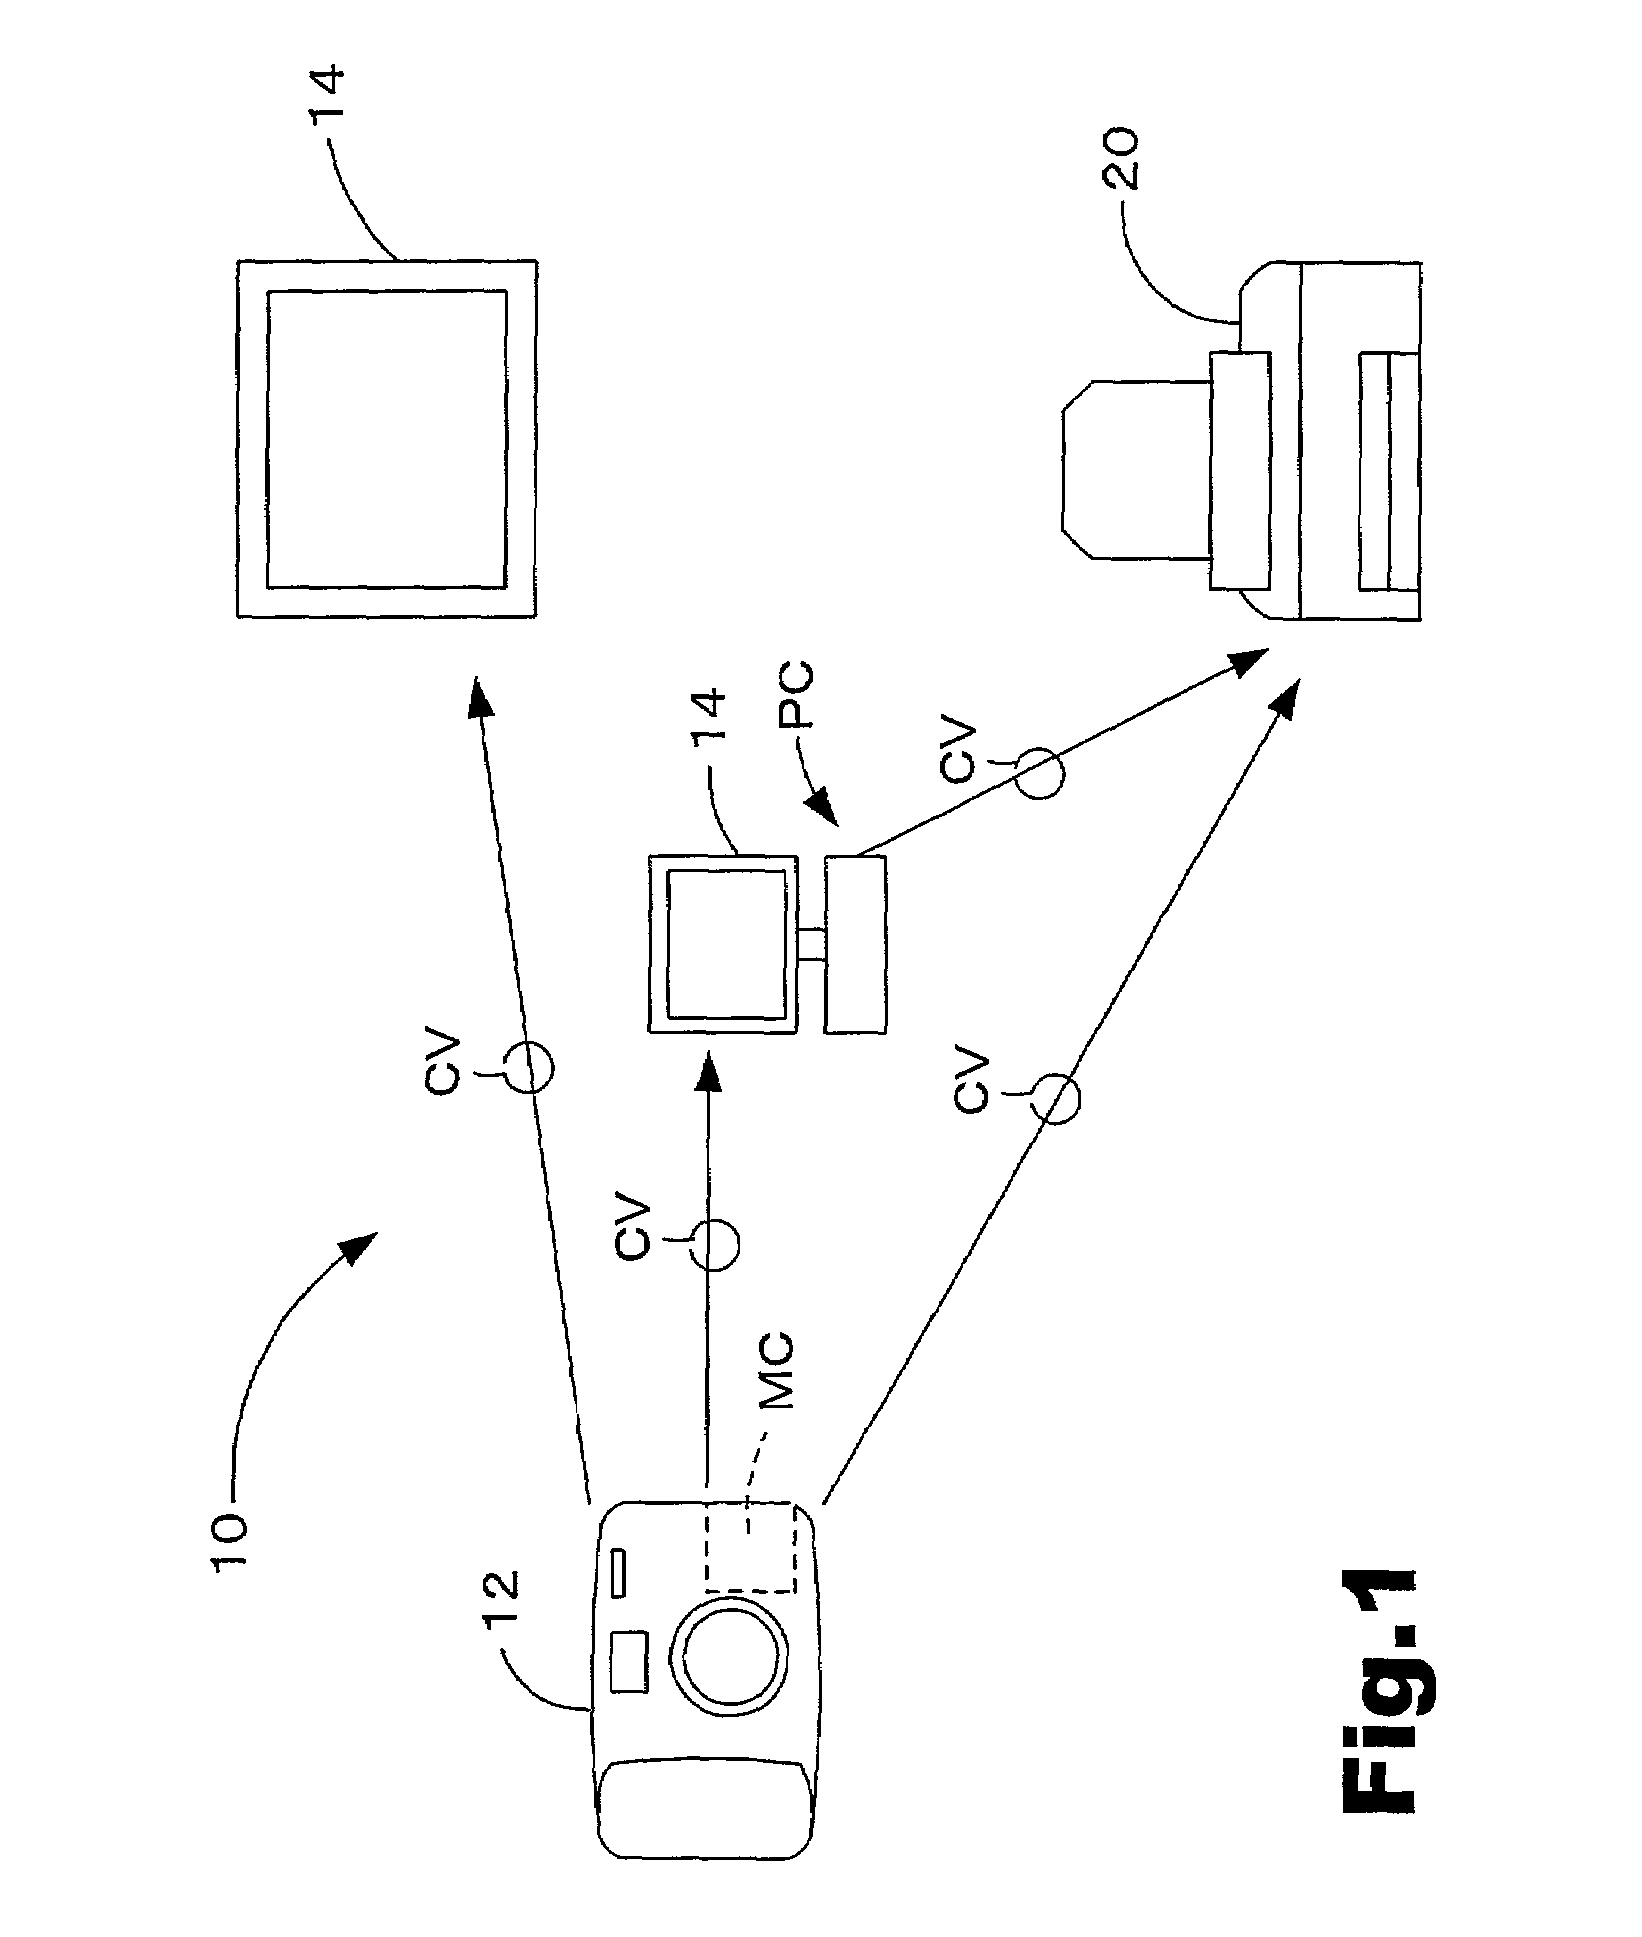 Output image adjustment method, apparatus and computer program product for graphics files